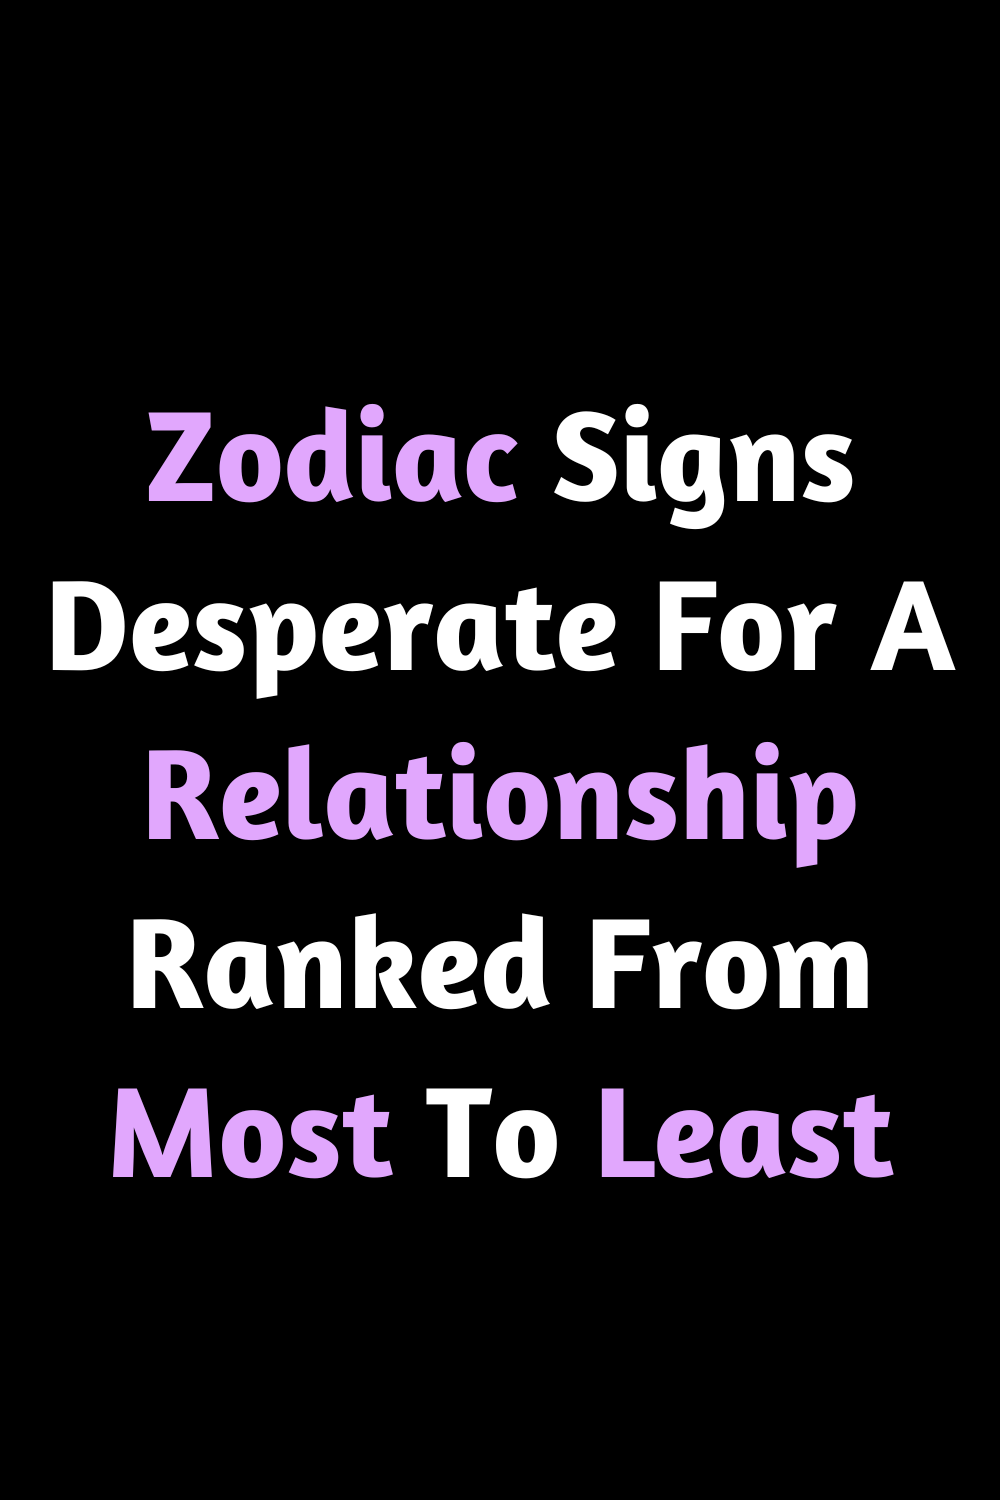 Zodiac Signs Desperate For A Relationship Ranked From Most To Least ...